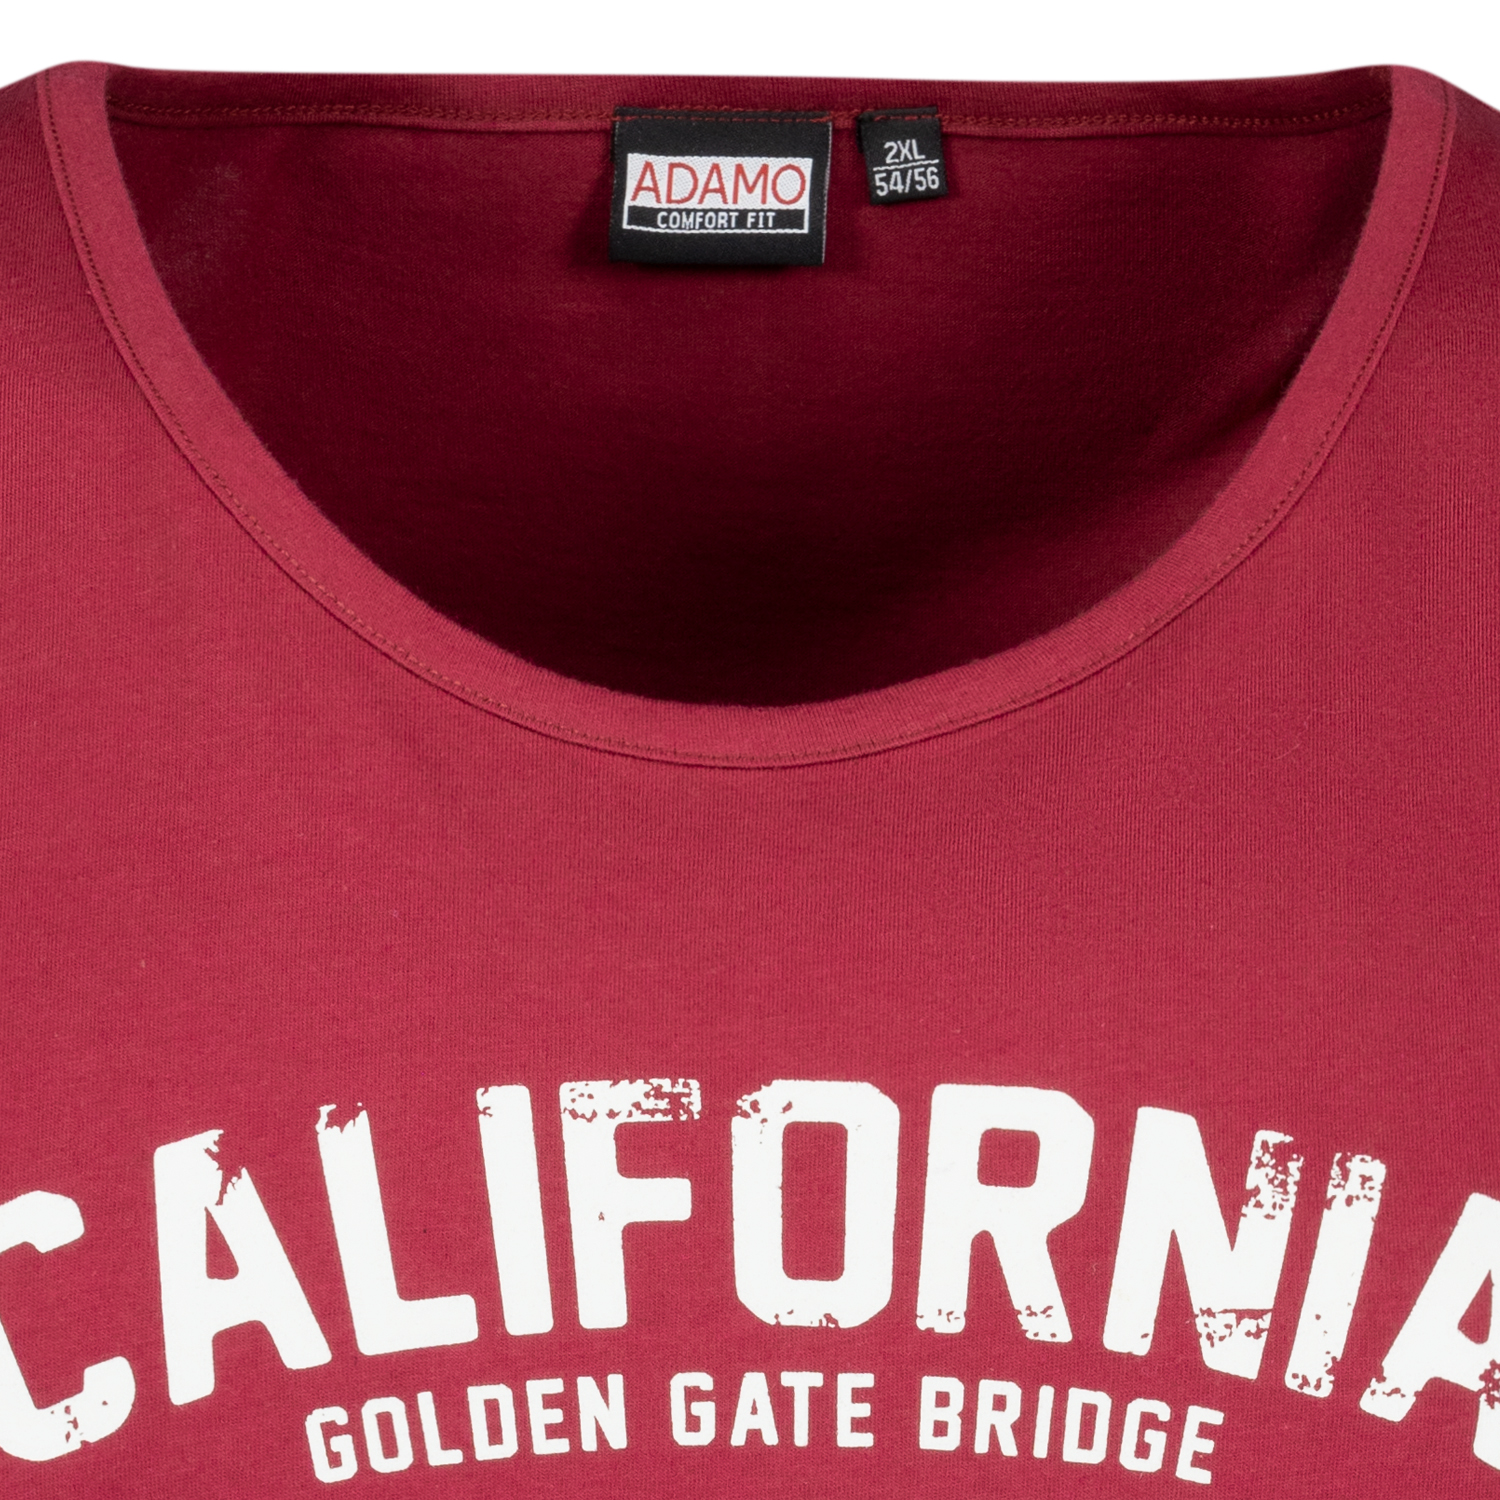 Printed muscle shirt by ADAMO burgundy in sizes 2XL-12XL series "Golden Gate" COMFORT FIT